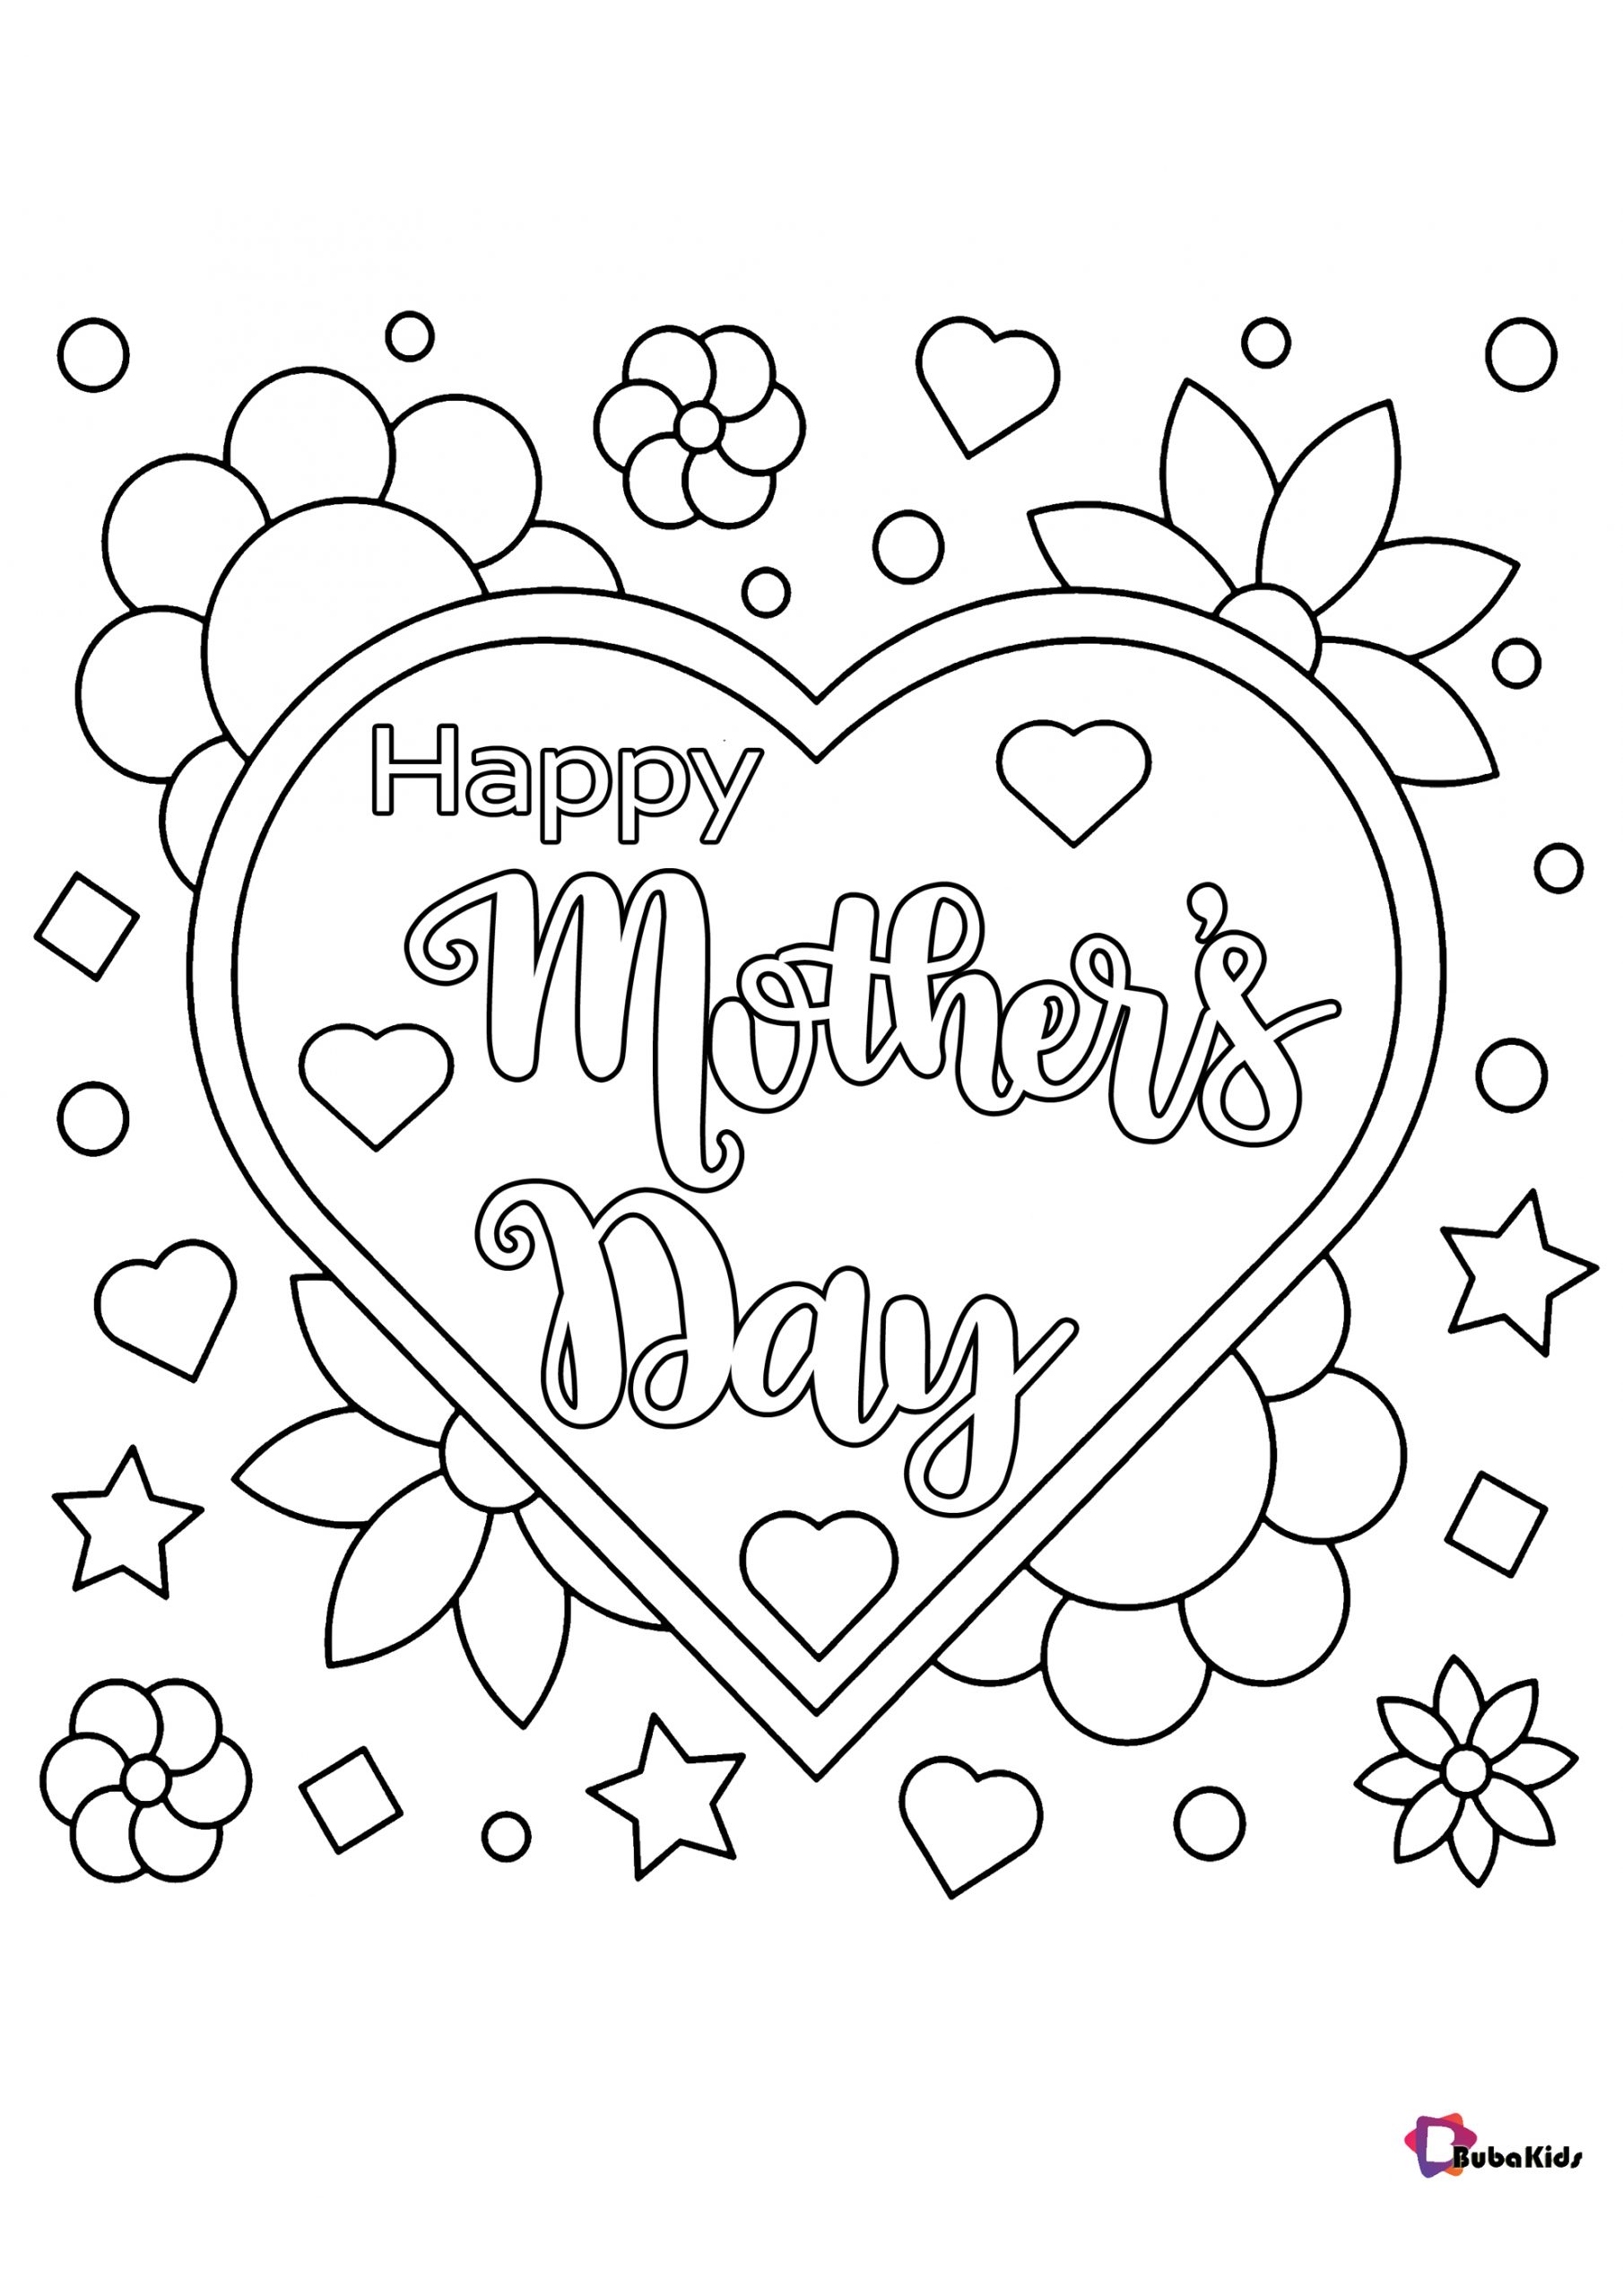 Happy mother’s day coloring pages hearts and flowers